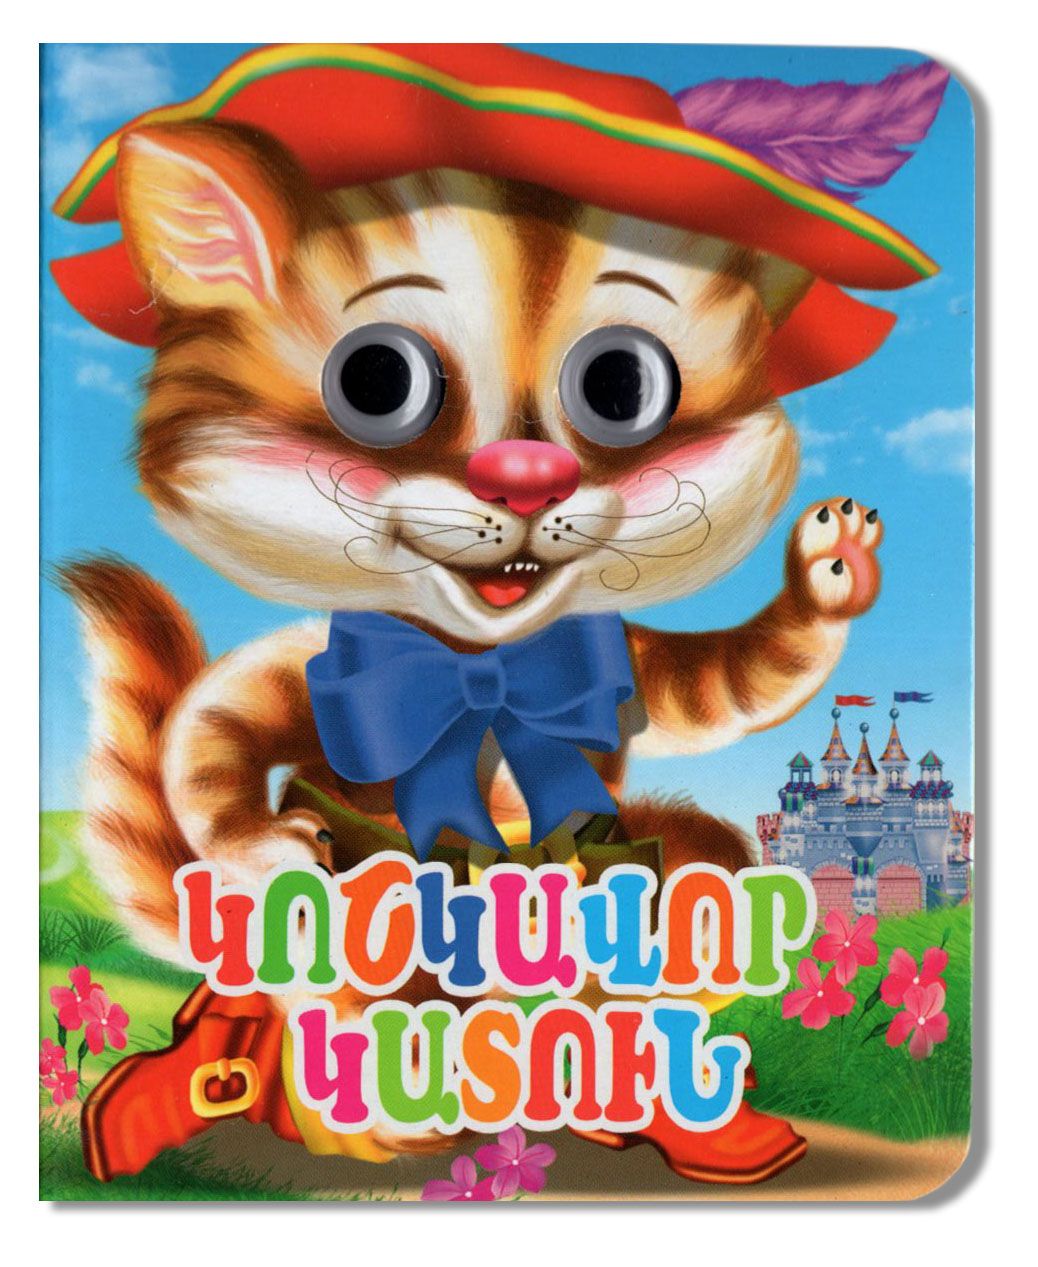 Puss in Boots (board book)